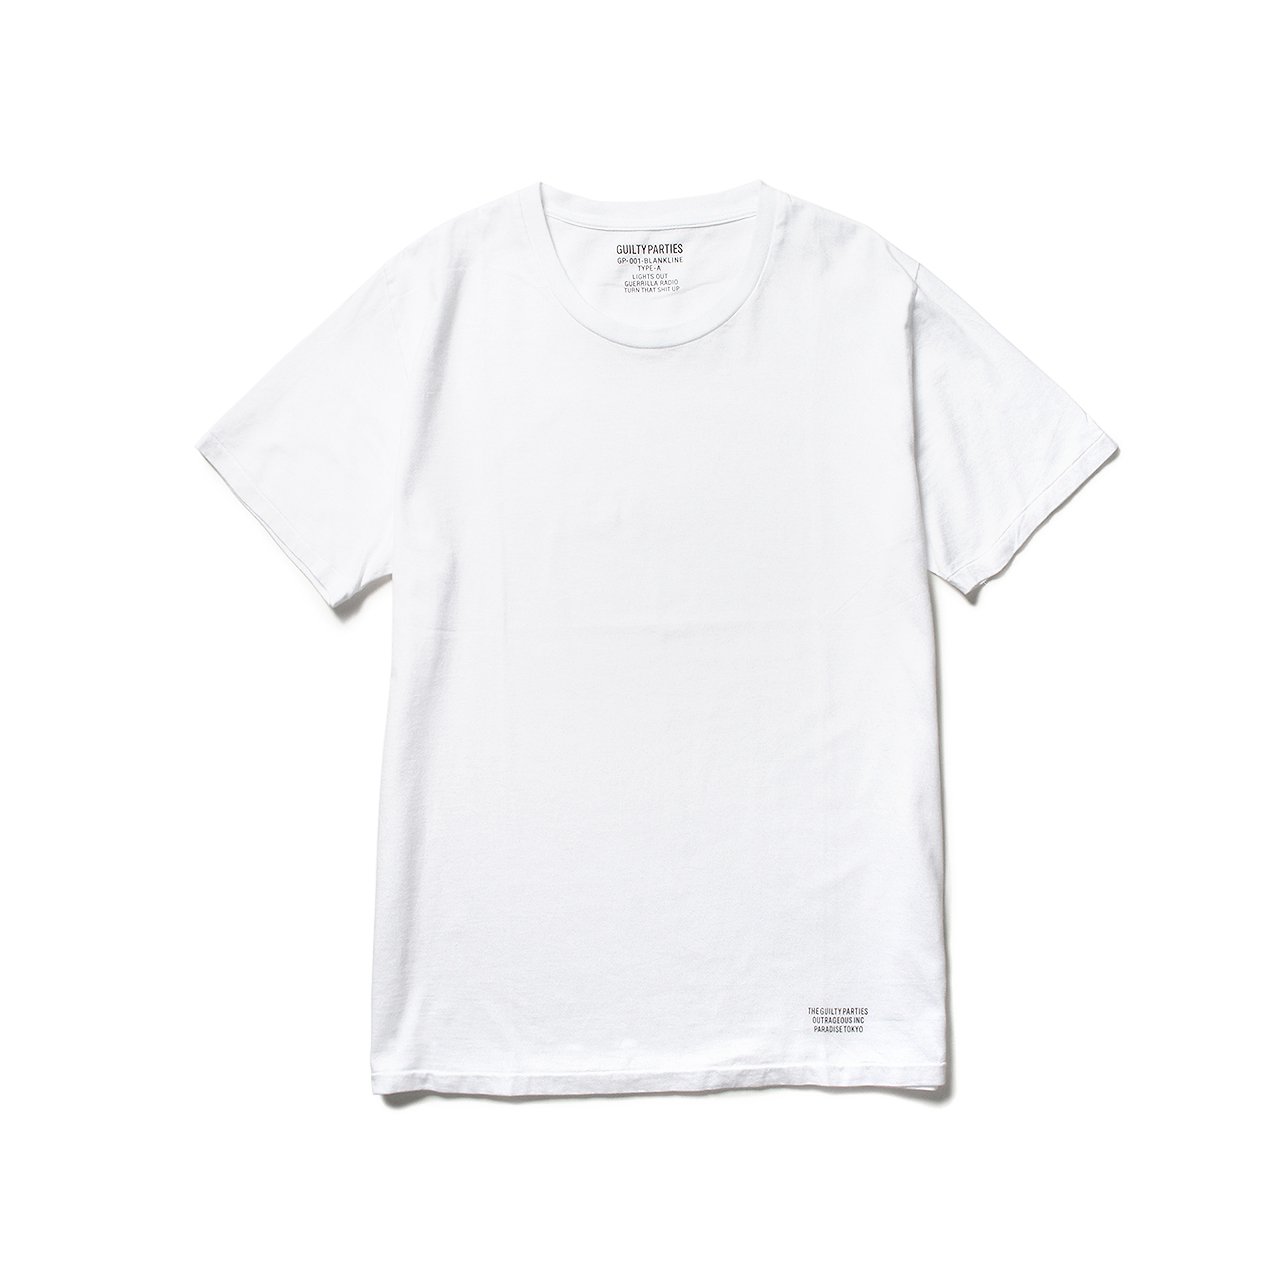 wacko maria heavy weight "blankline" crew neck t-shirt (type-a) 2-pack (white) - gp-001-blankline-type-a-wht - a.plus - Image - 2